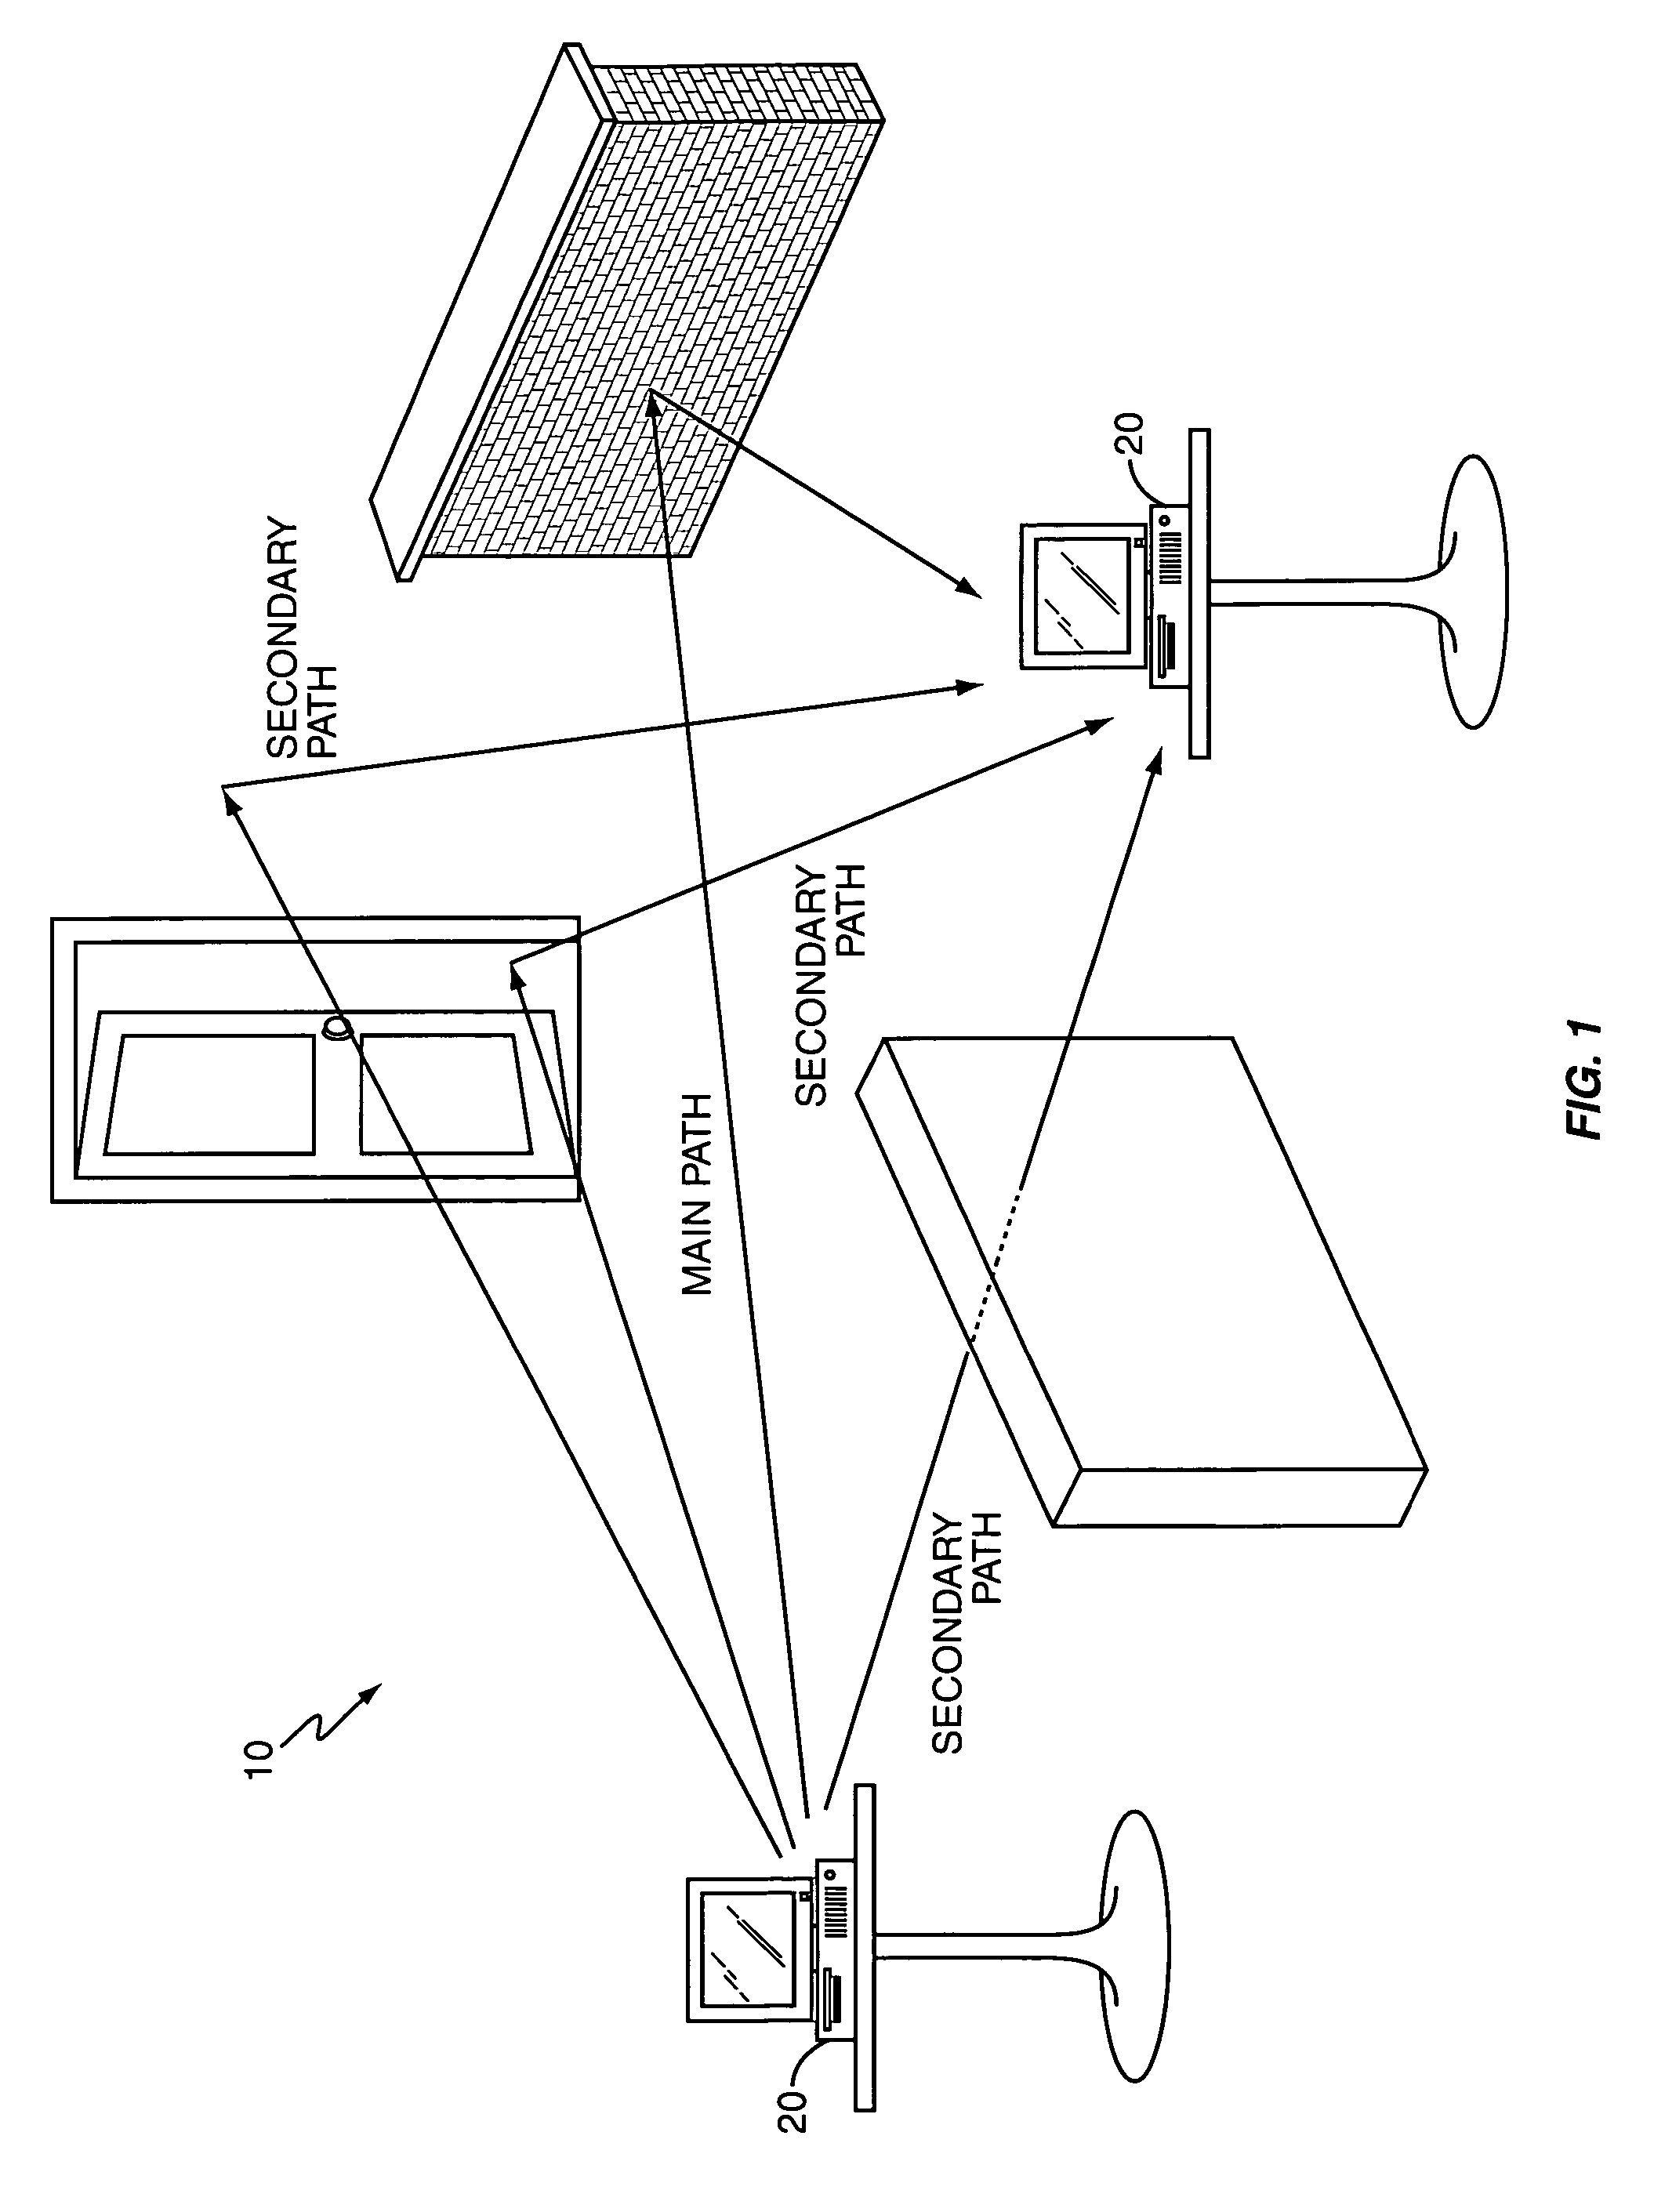 Method and apparatus for multipath signal compensation in spread-spectrum communications systems